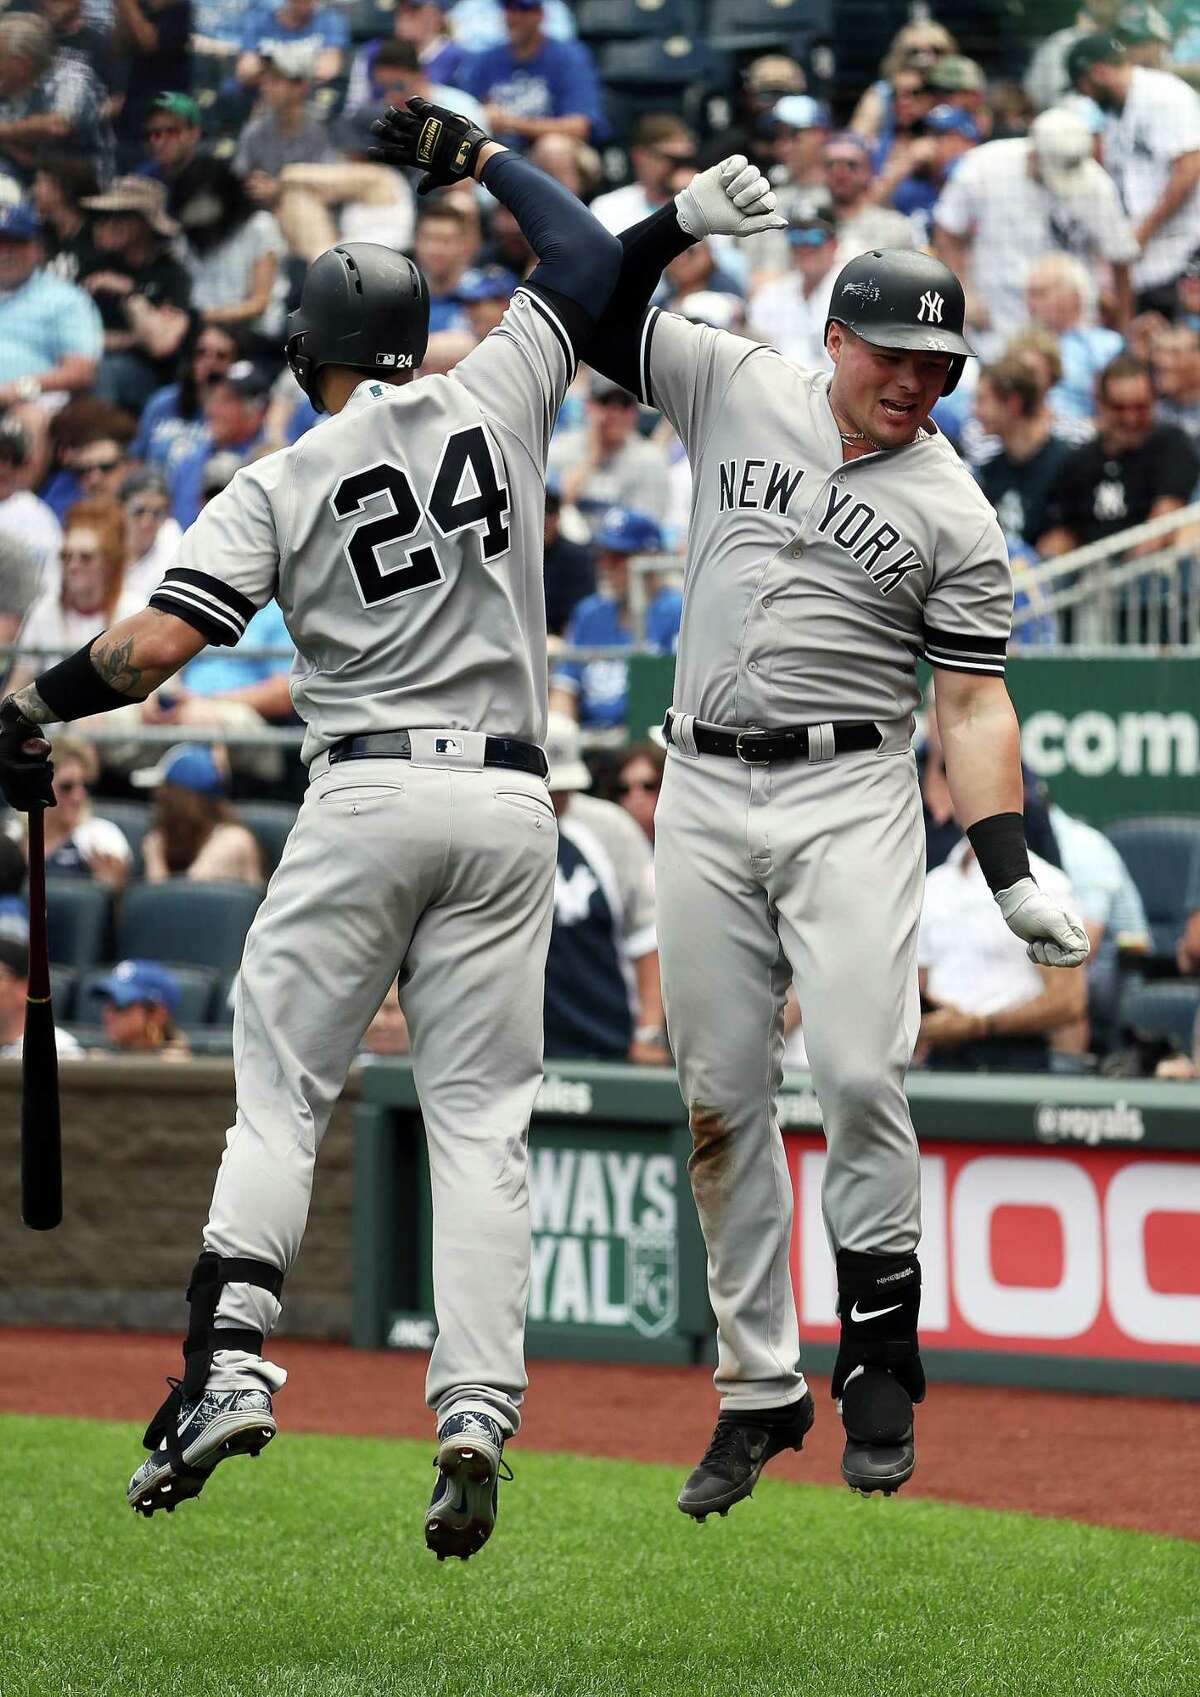 KANSAS CITY, MISSOURI - MAY 25: Luke Voit #45 of the New York Yankees is congratulated by Gary Sanchez #24 after hitting a two-run home run during the 7th inning of the game against the Kansas City Royals at Kauffman Stadium on May 25, 2019 in Kansas City, Missouri. (Photo by Jamie Squire/Getty Images)